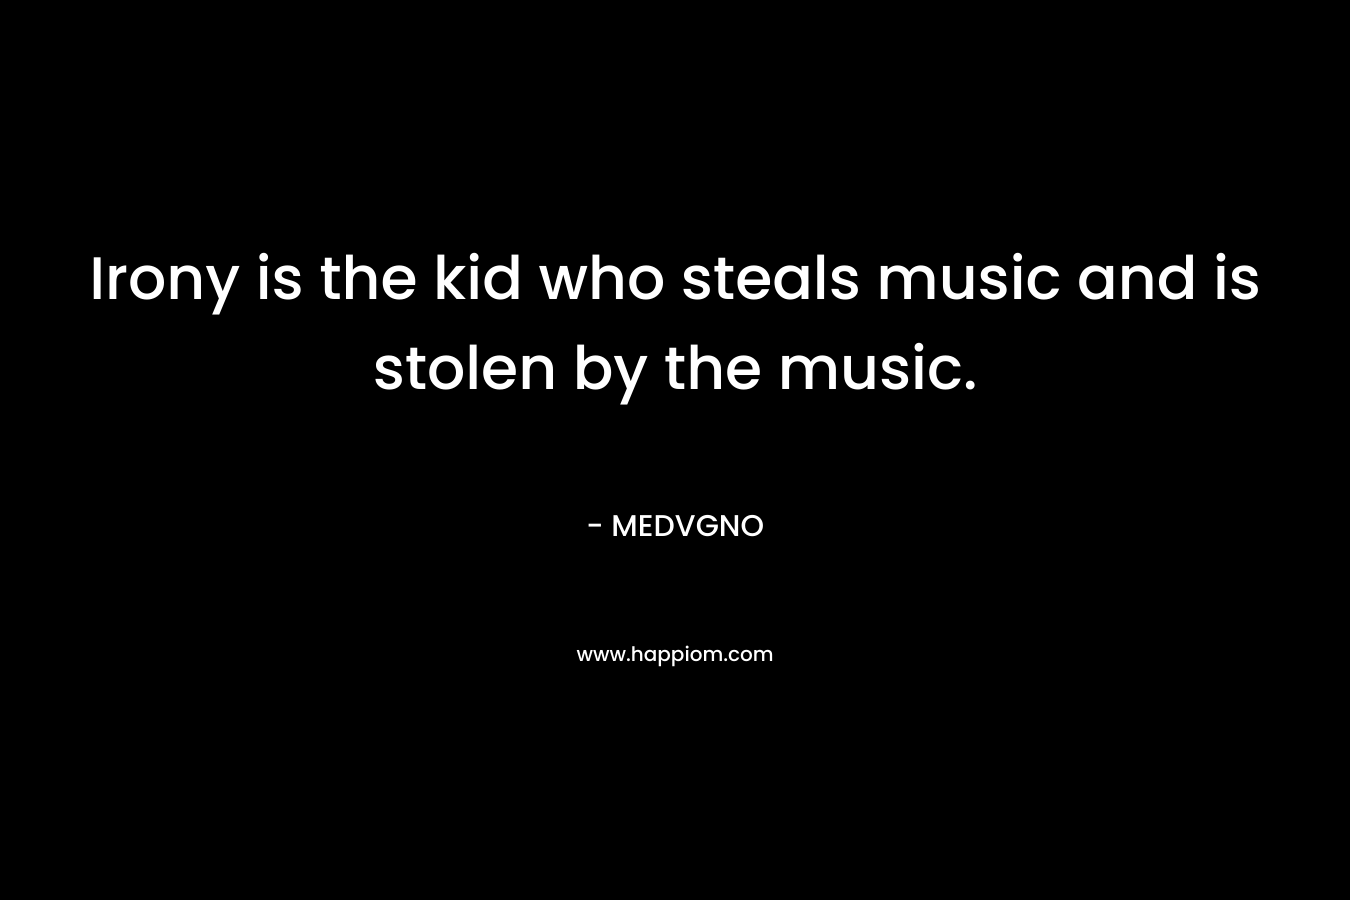 Irony is the kid who steals music and is stolen by the music. – MEDVGNO